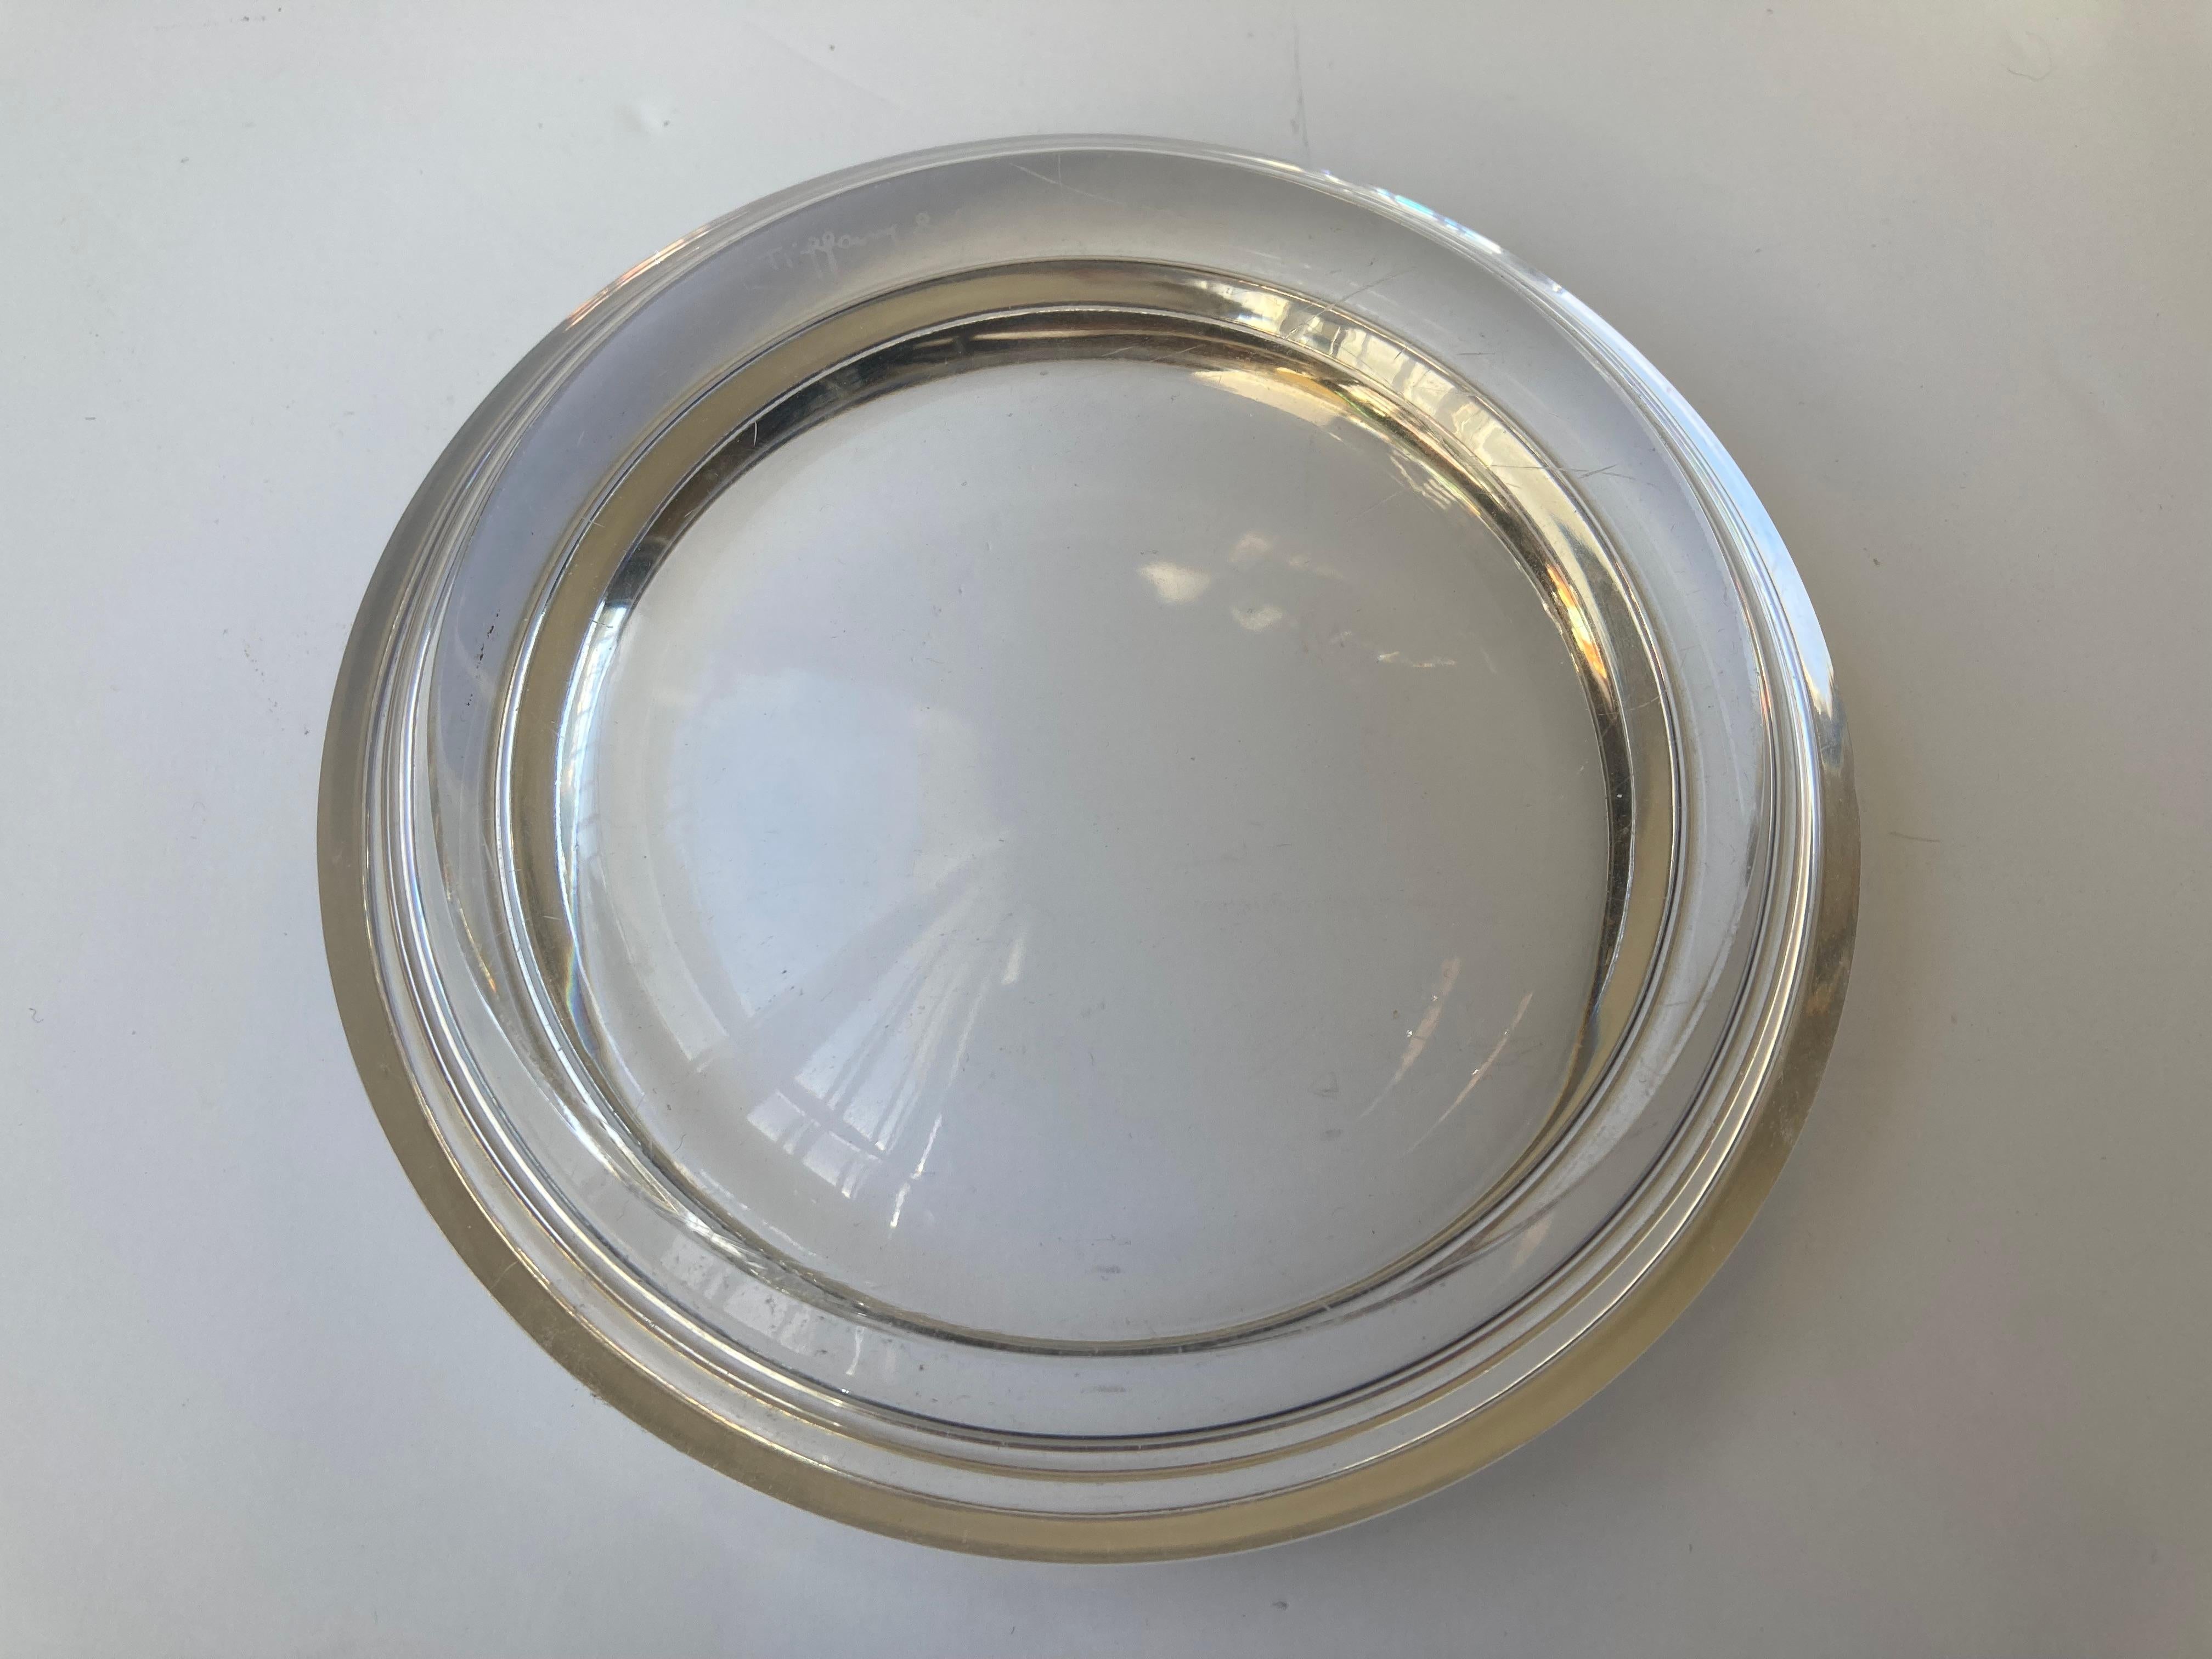 Modern Ward Bennett bowl/ Vide - Poche  clear glass for Tiffany Co .Signed  For Sale